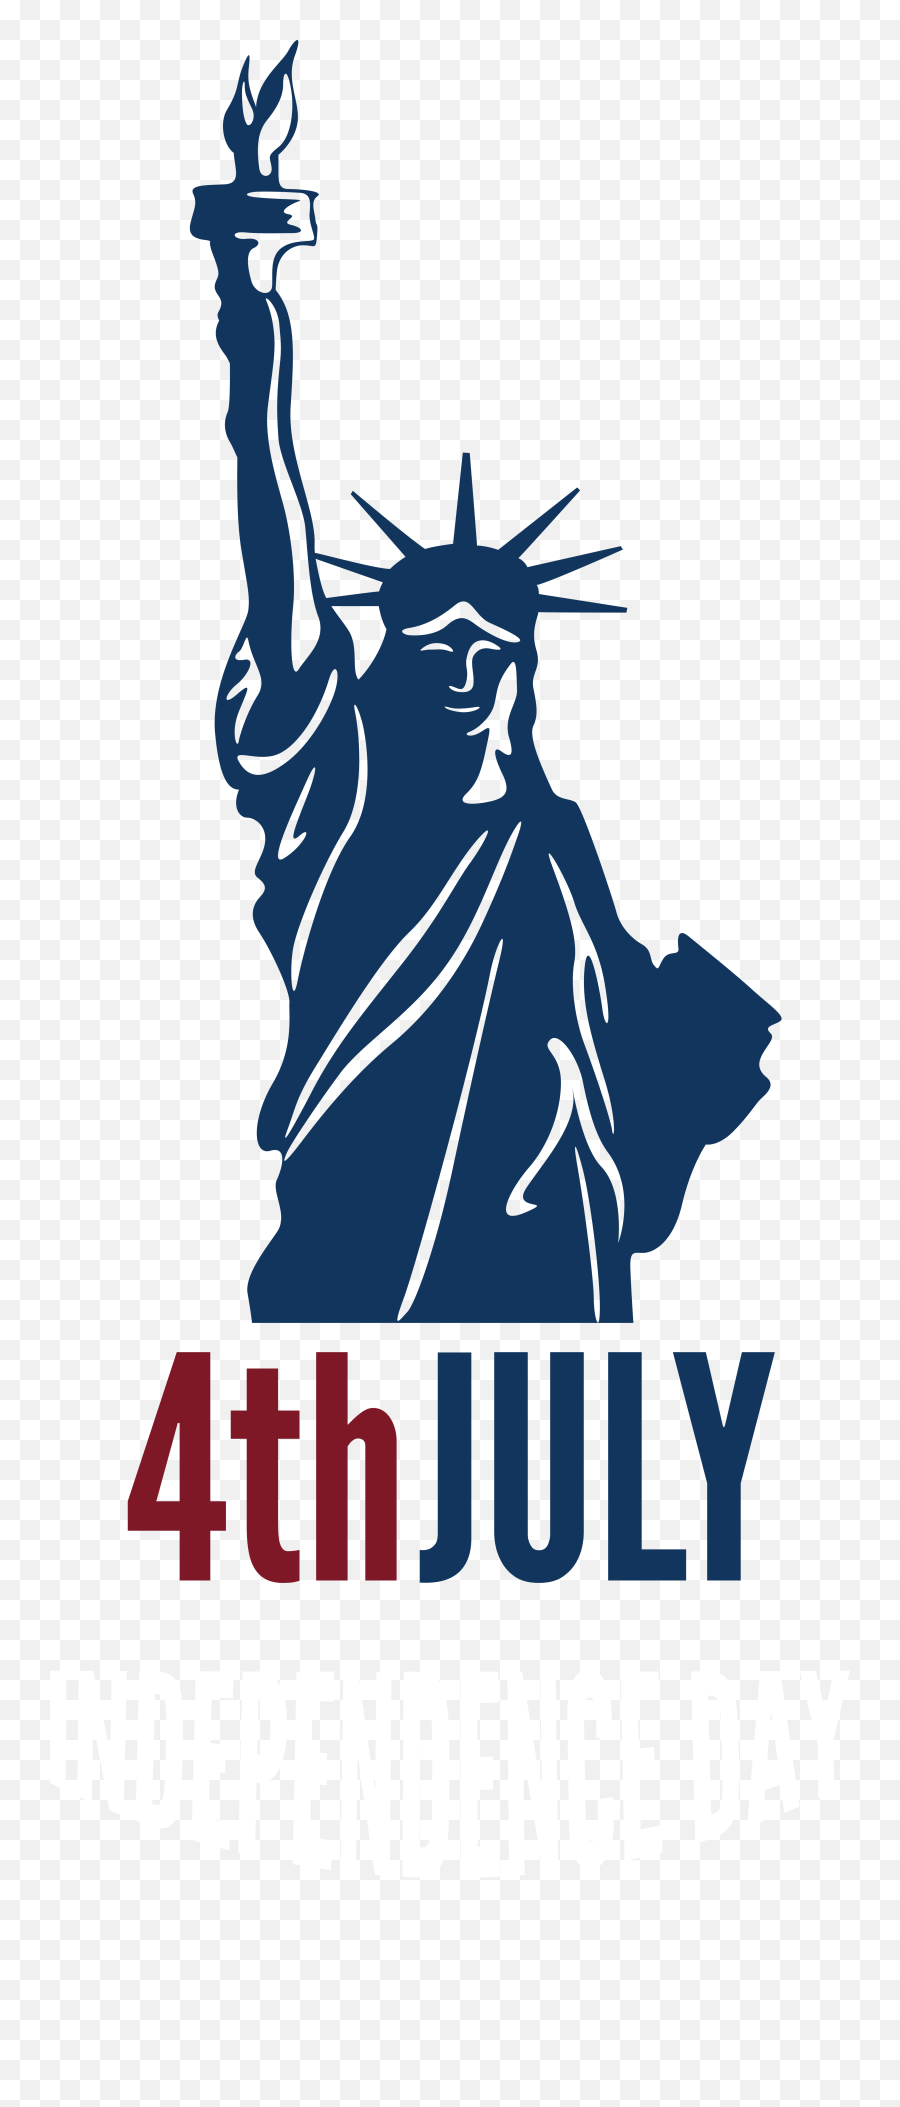 4th July Independence Day With Statue Of Liberty Png Clip - Statue Of Liberty National Monument,Independence Day Png